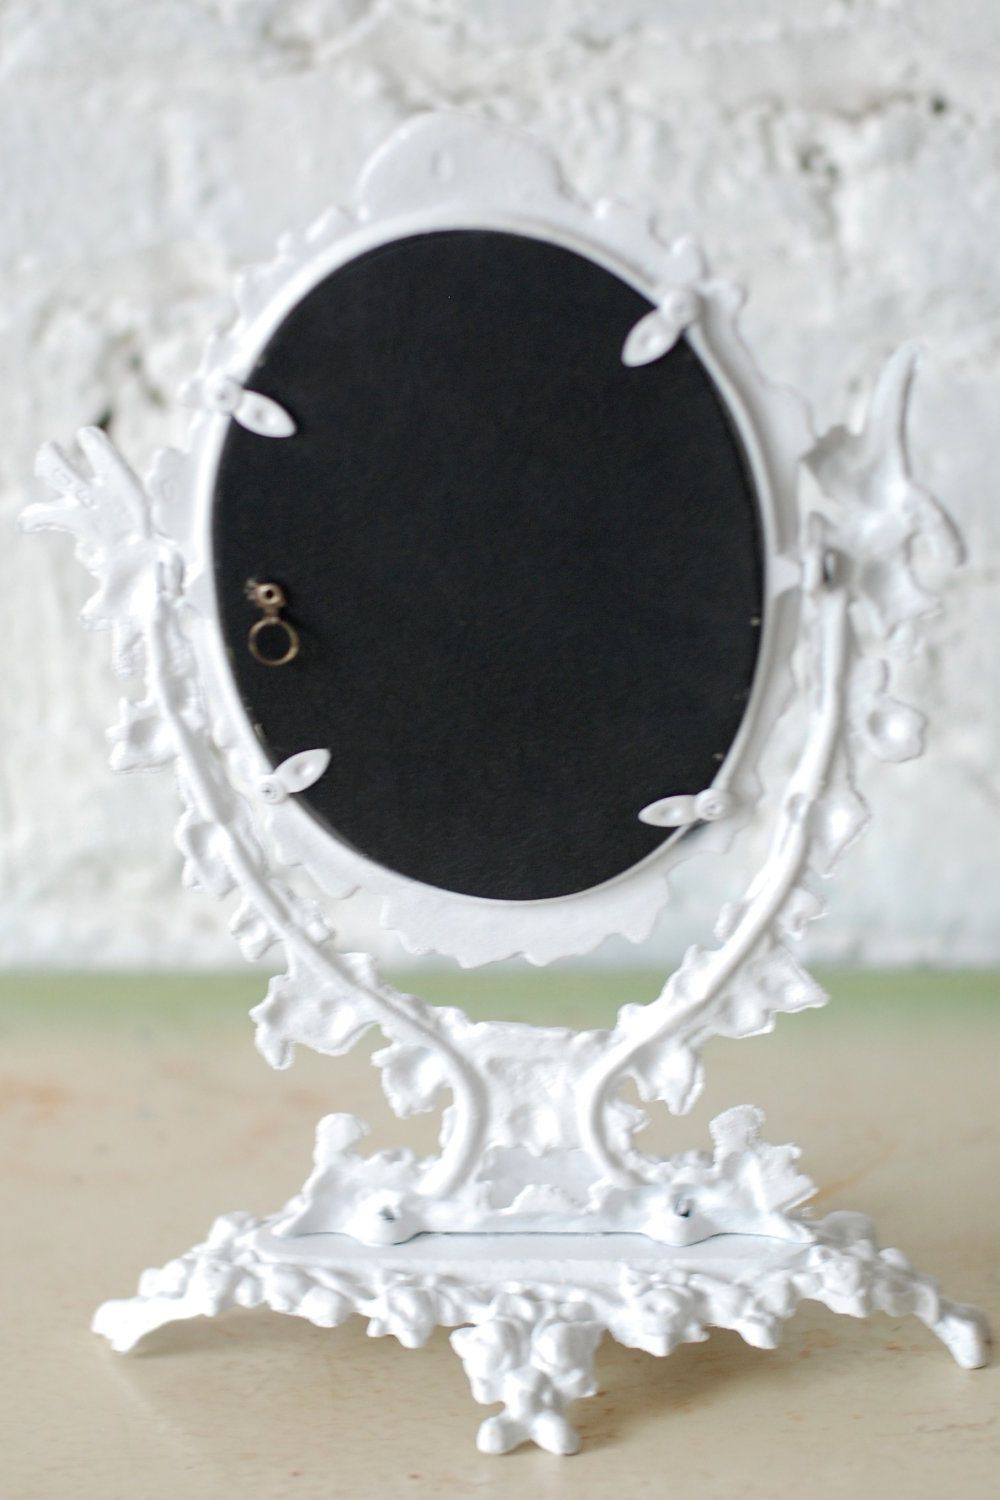 Preferred Antique Brass Standing Mirrors Inside Antique Ornate Metal Pedestal Mirror / Stand Alone Frame (View 13 of 15)